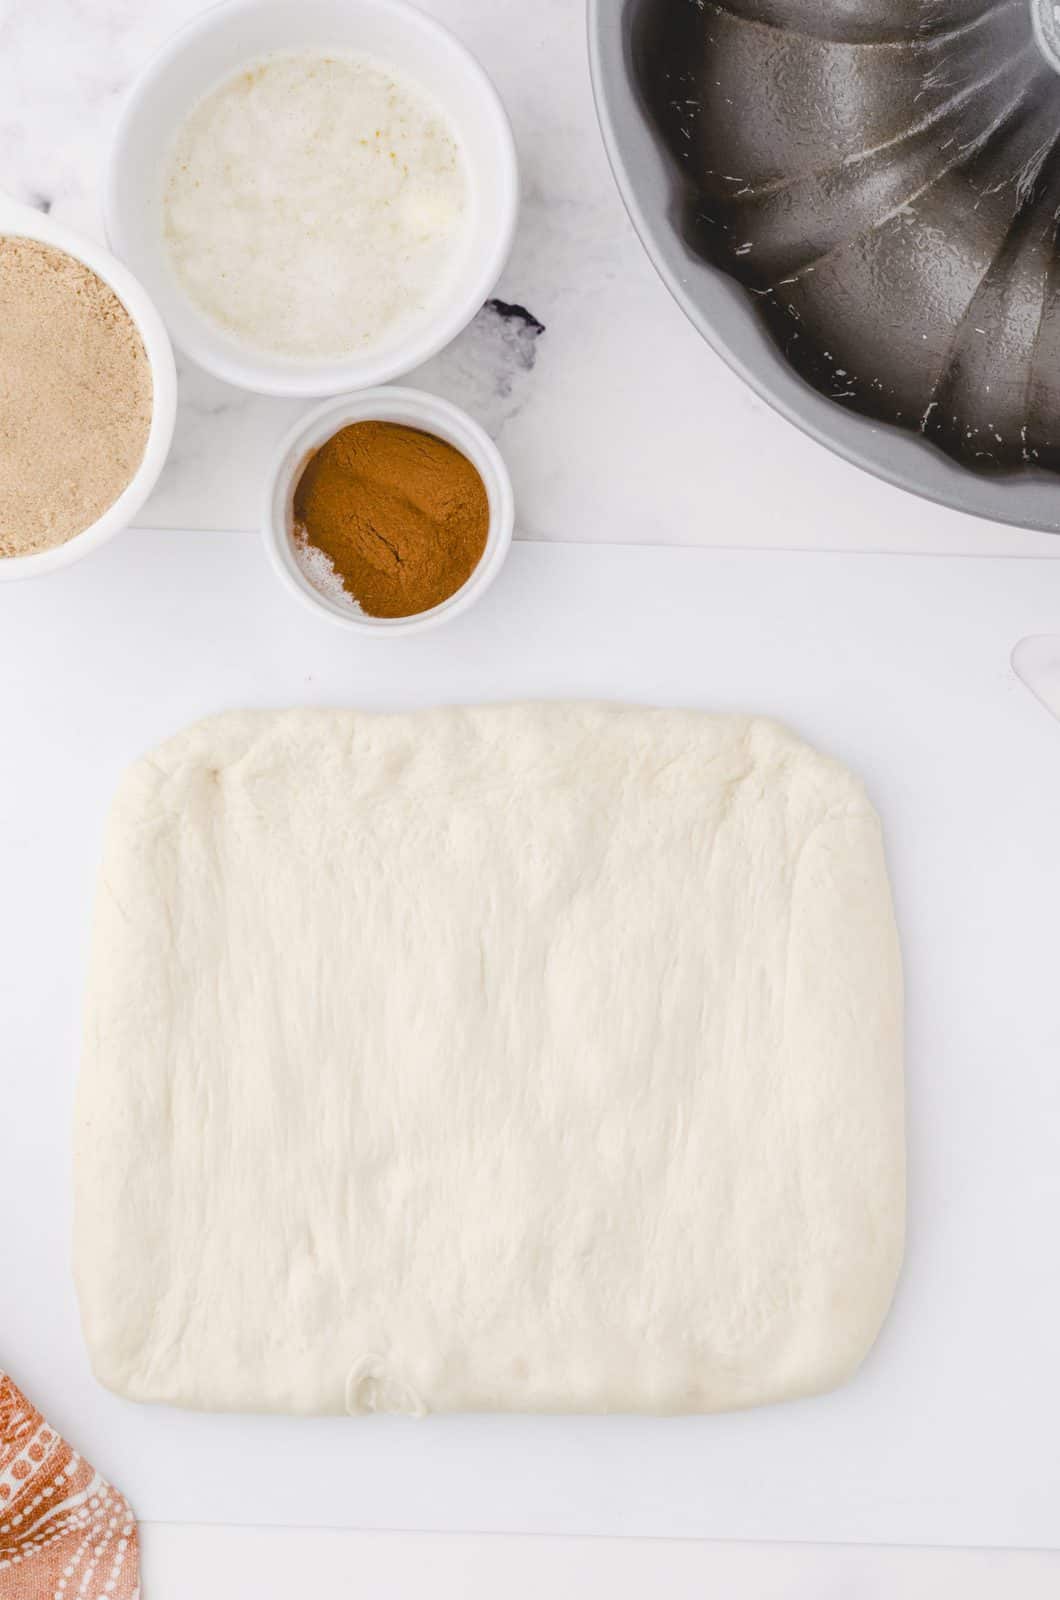 Thawed bread dough patted into a square.